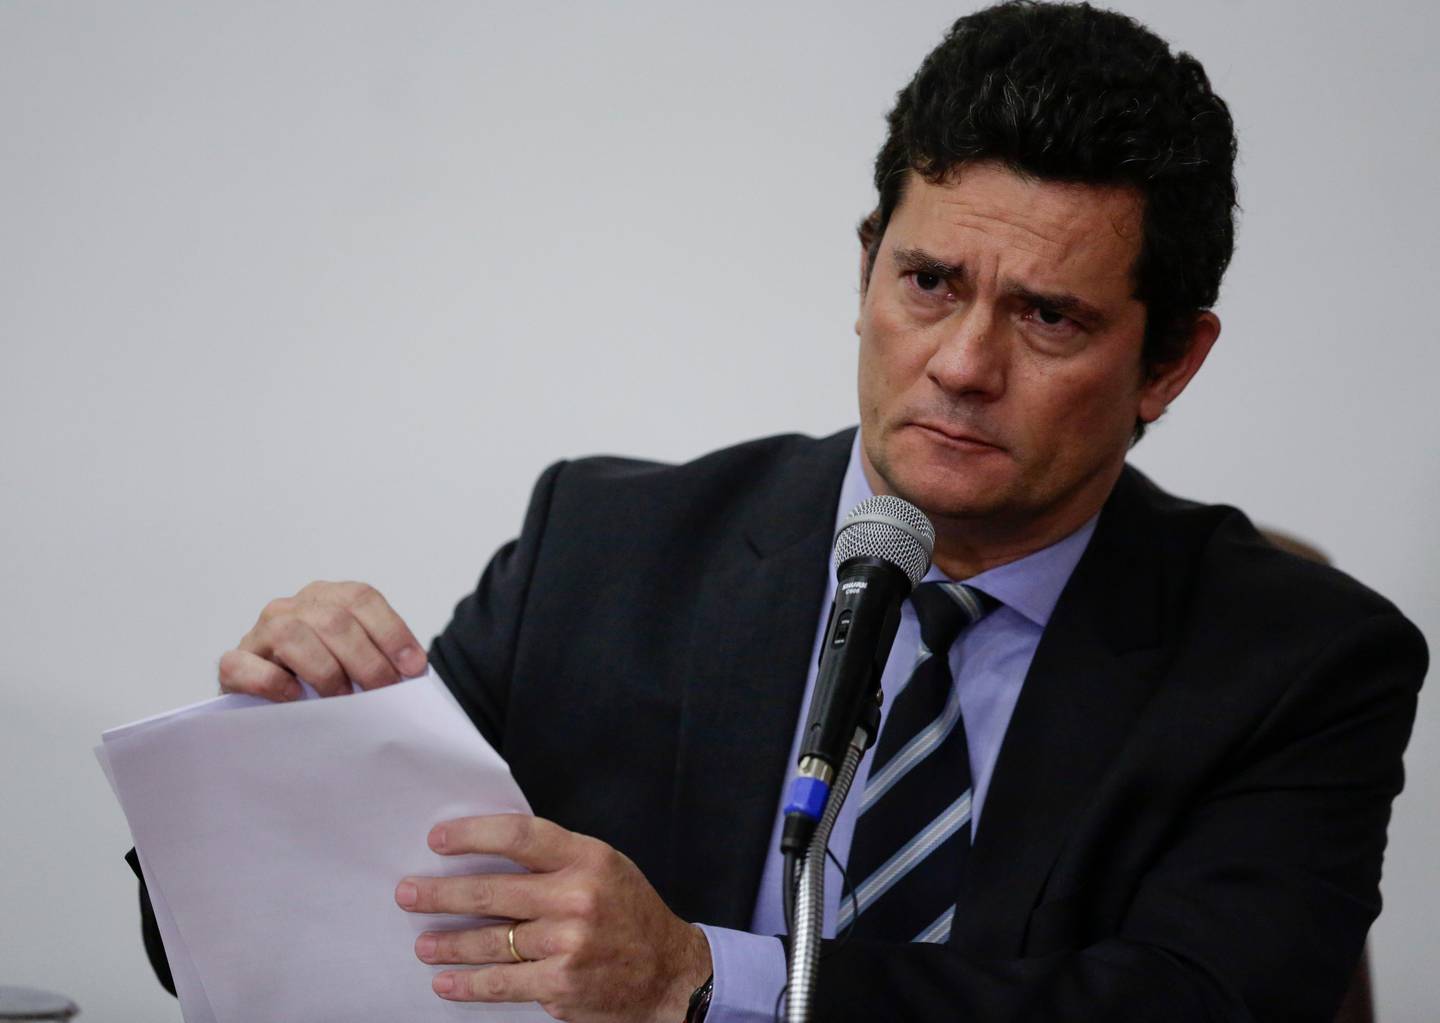 Brazil's Justice Minister Sergio Moro gives a press conference to announce his resignation in Brasilia, Brazil, Friday, April 24, 2020. Moro made the announcement after Brazilian President Jair Bolsonaro changed the head of the country's federal police. (AP Photo/Eraldo Peres)